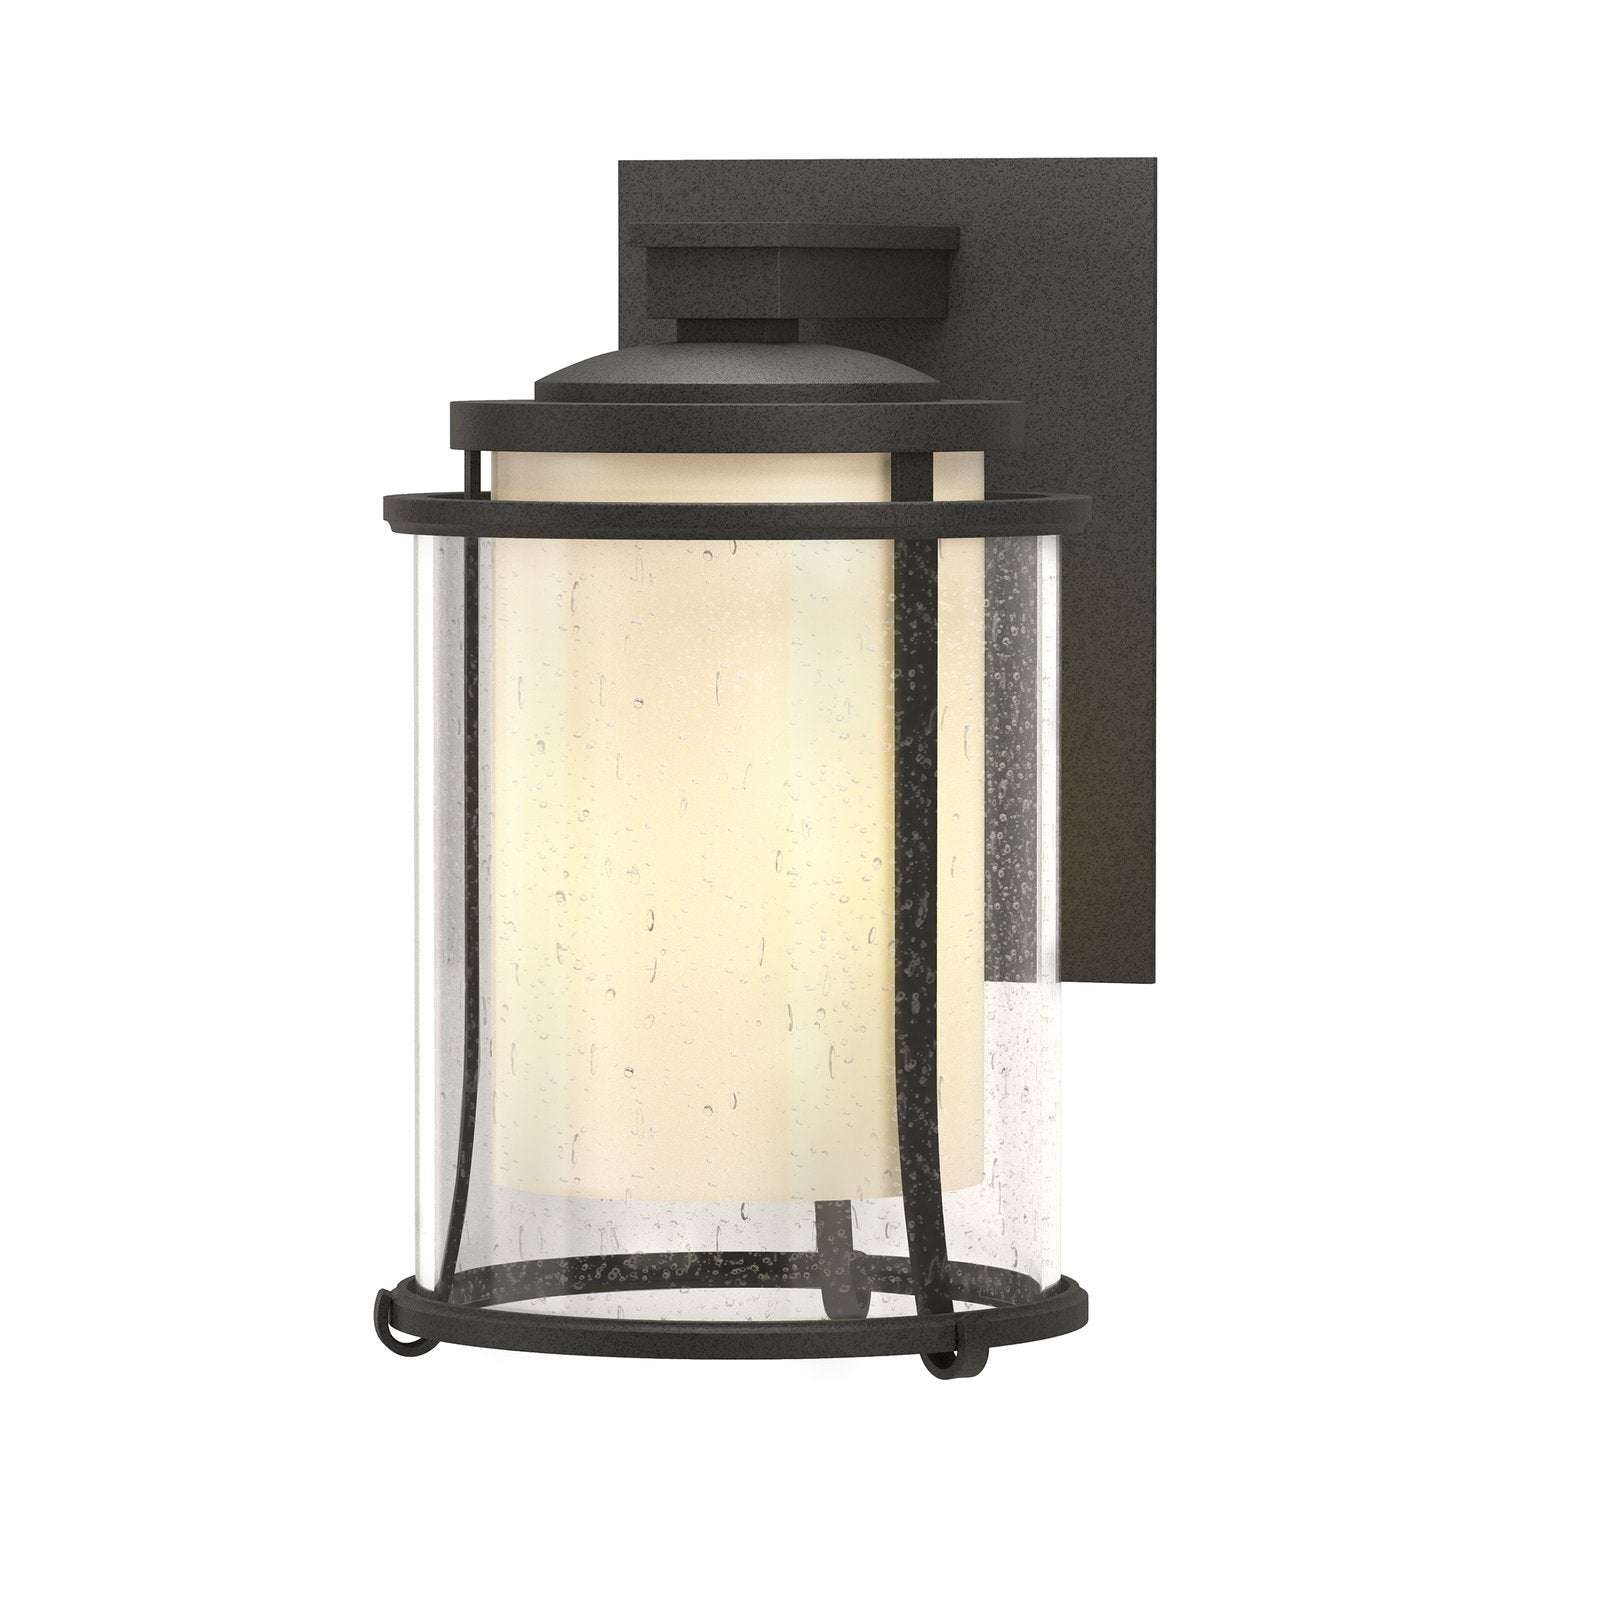 Hubbardton Forge Meridian Outdoor Sconce Outdoor l Wall Hubbardton Forge Coastal Natural Iron  